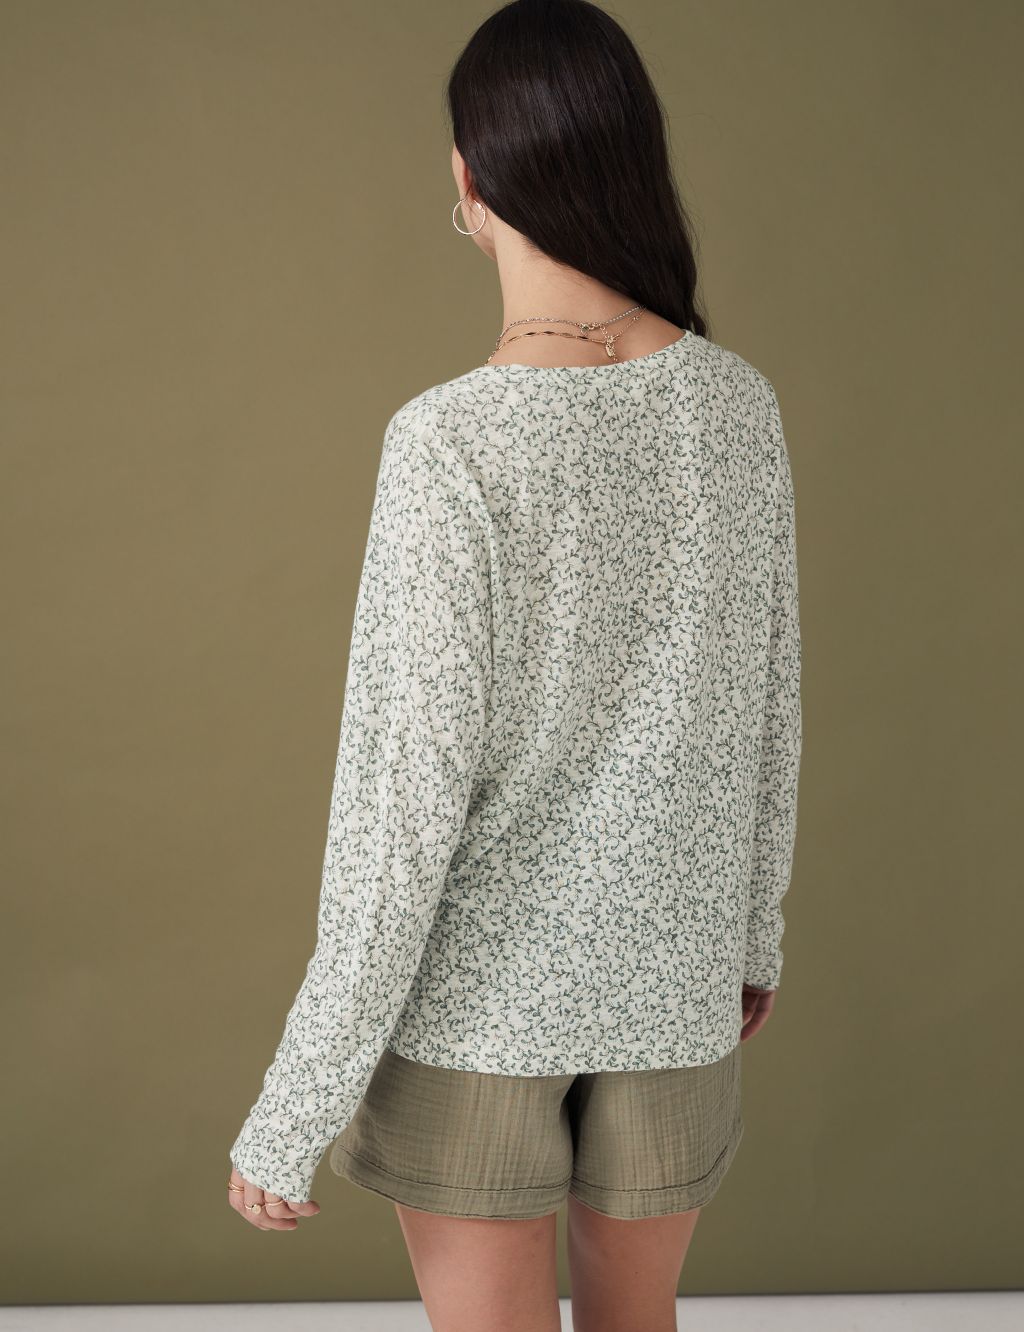 Linen Blend Printed Round Neck Top image 5